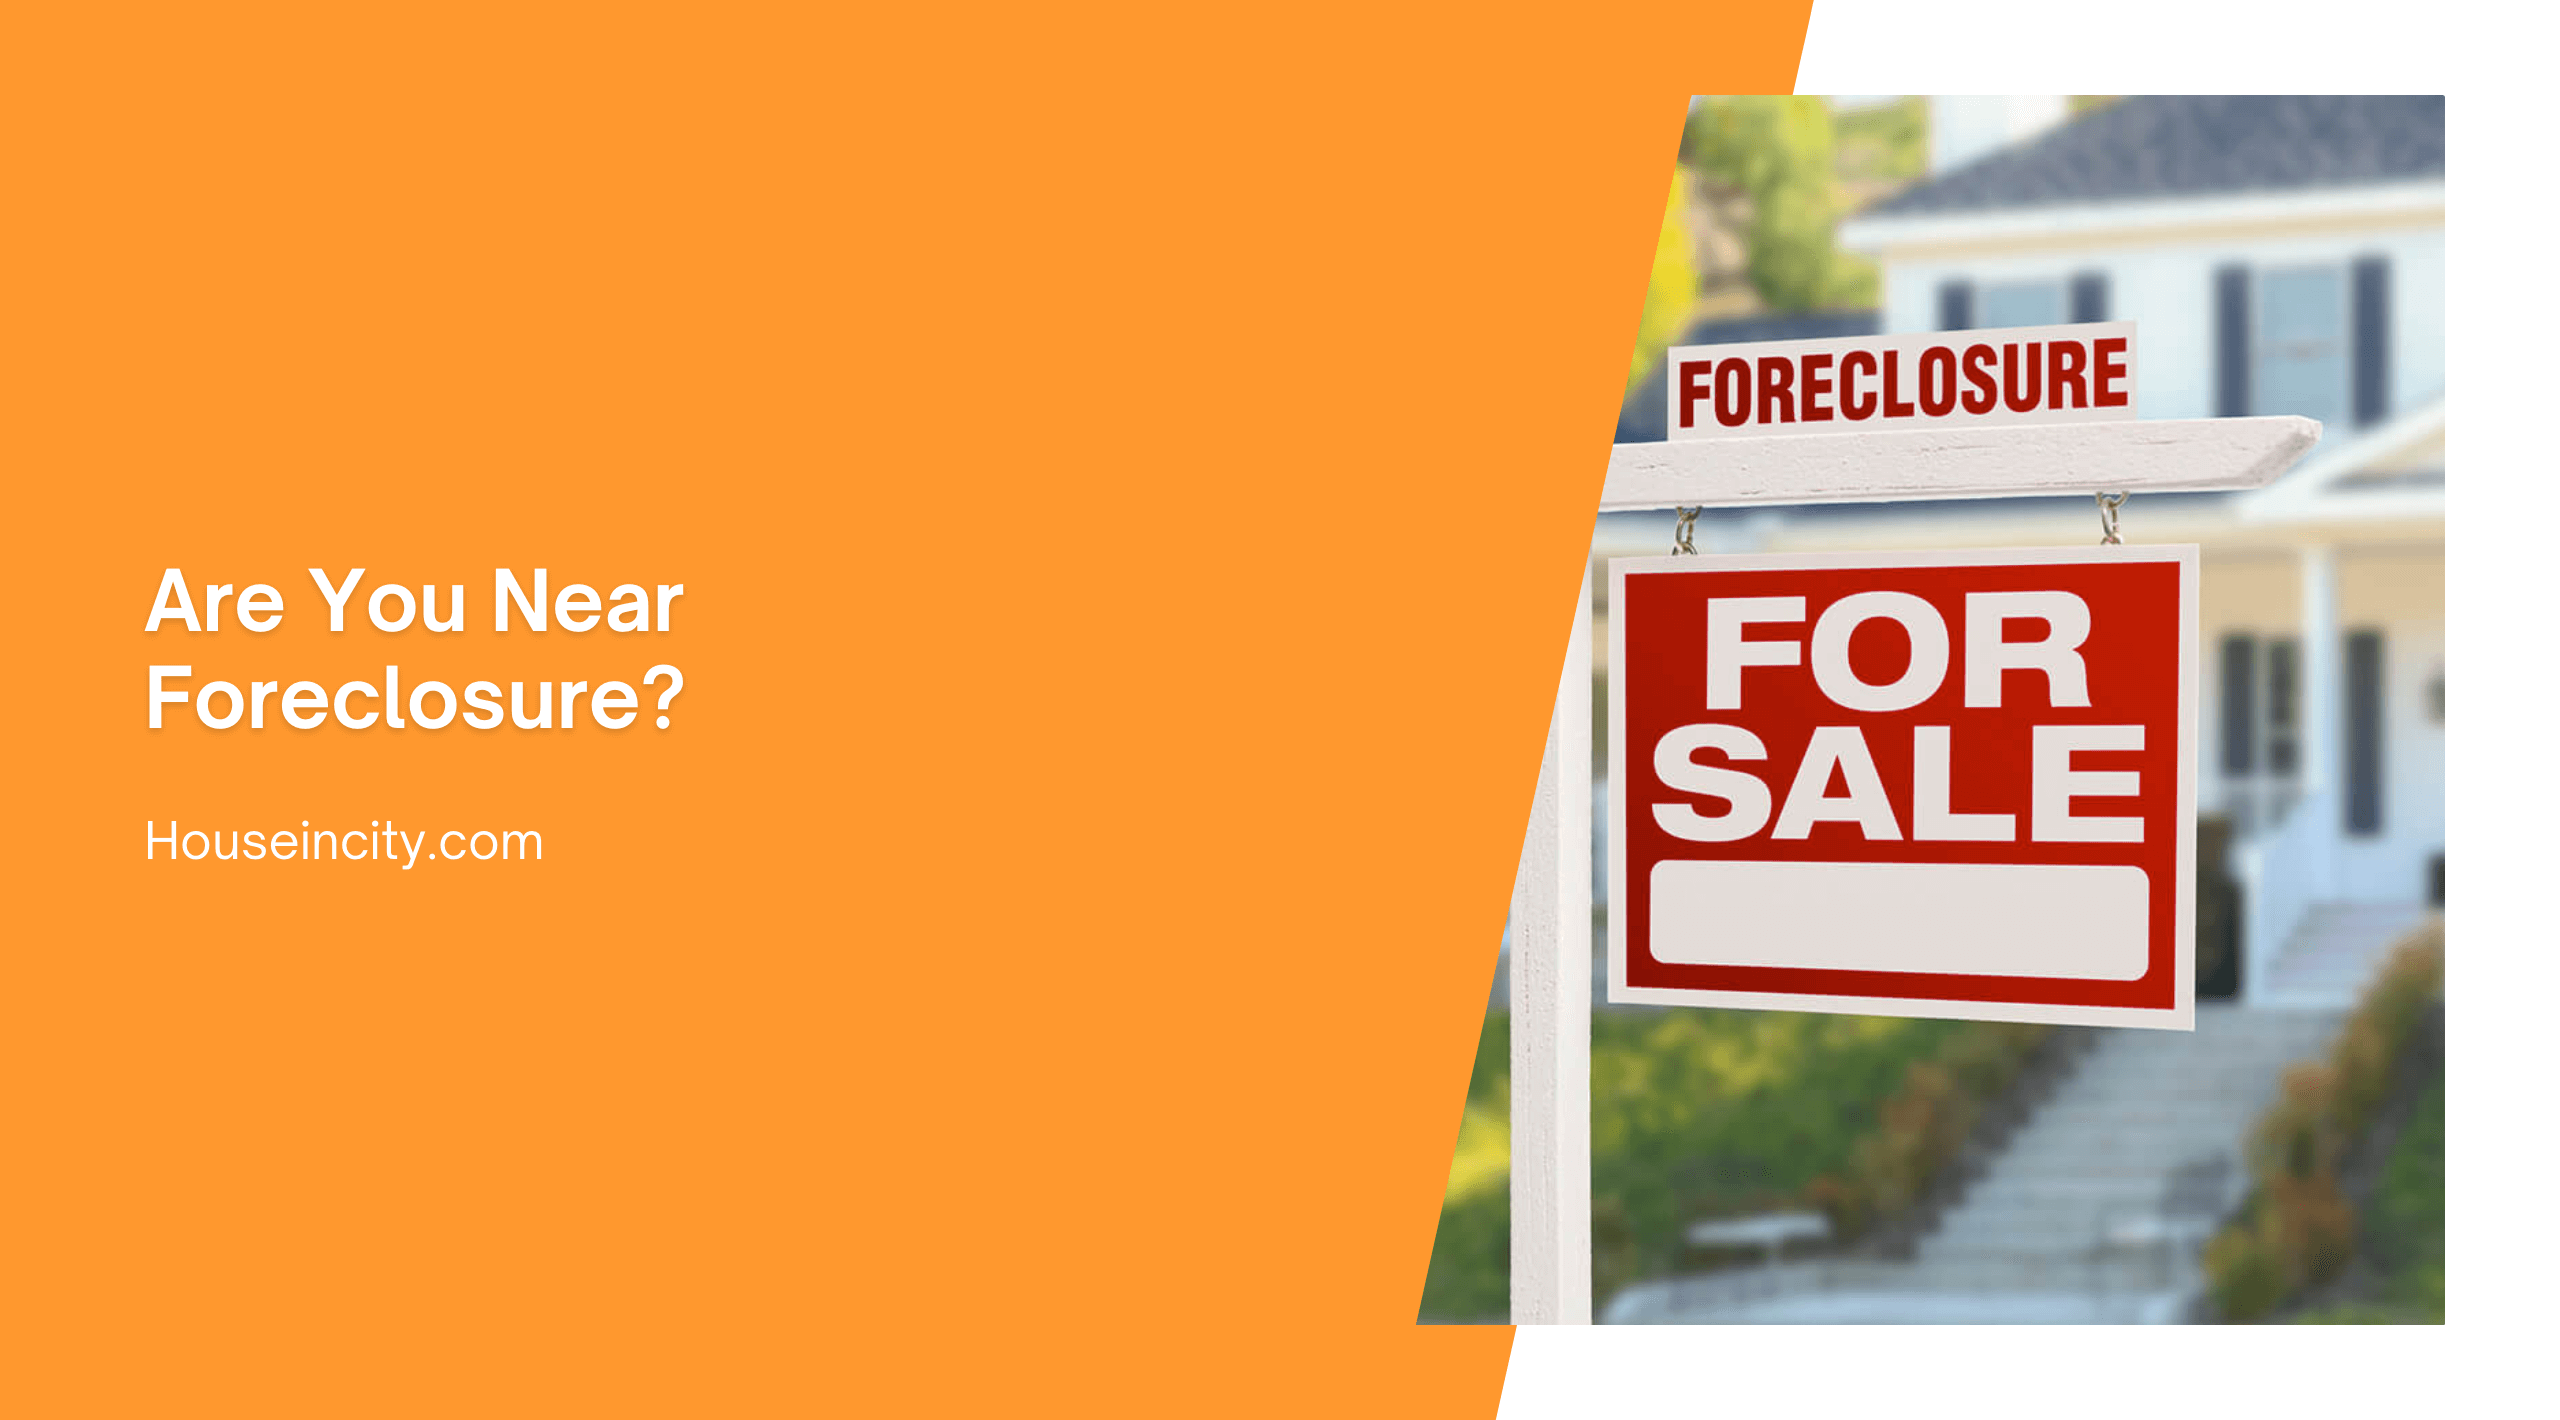 Are You Near Foreclosure?